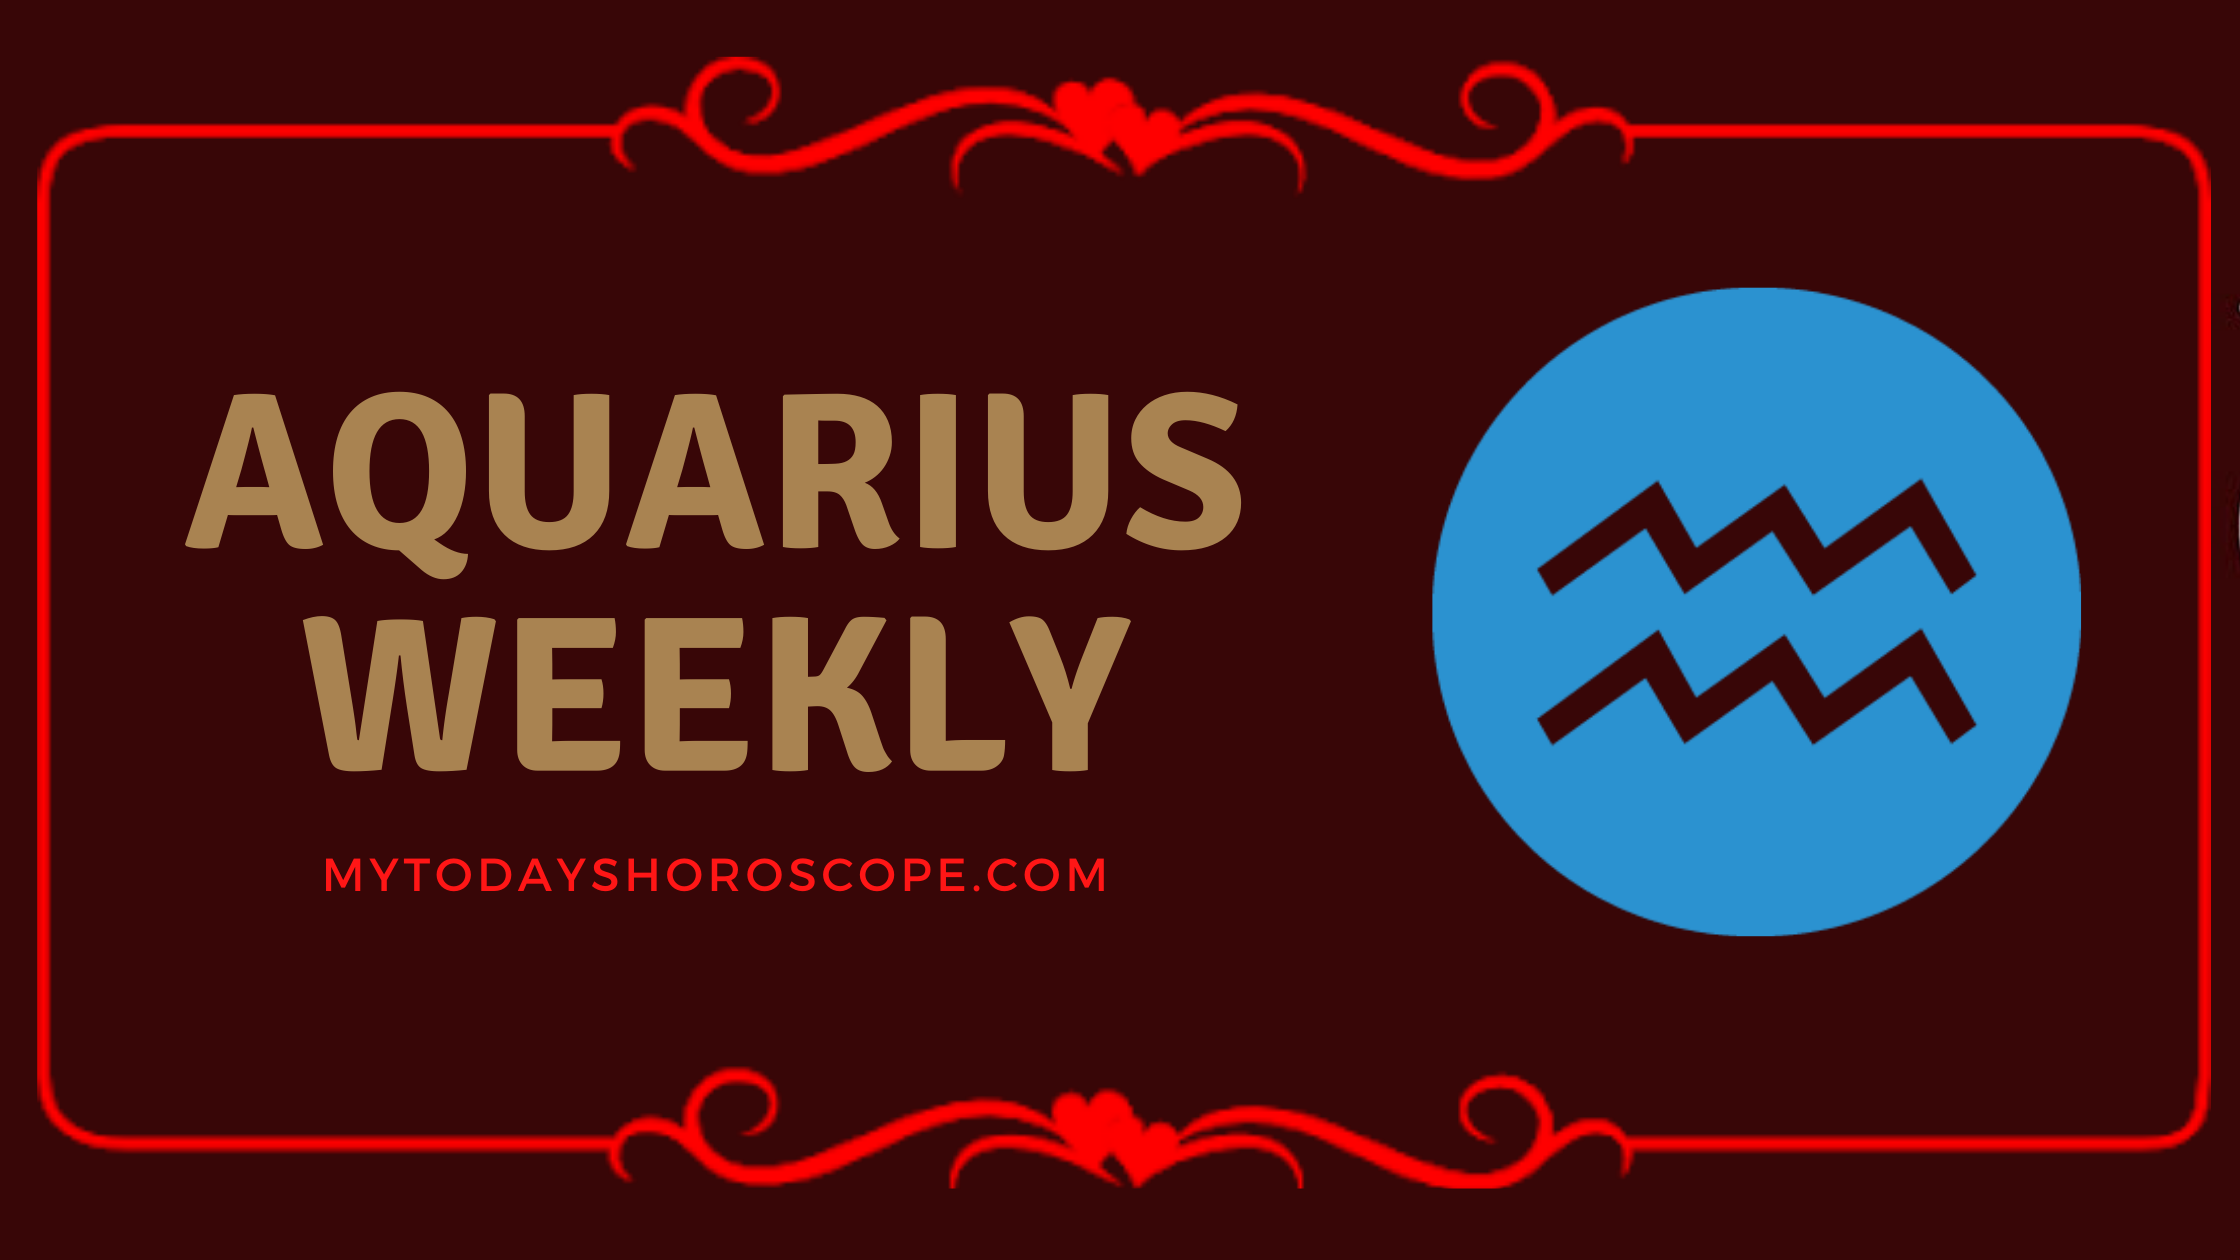 Aquarius Weekly Horoscope for Love, Work and Well-being